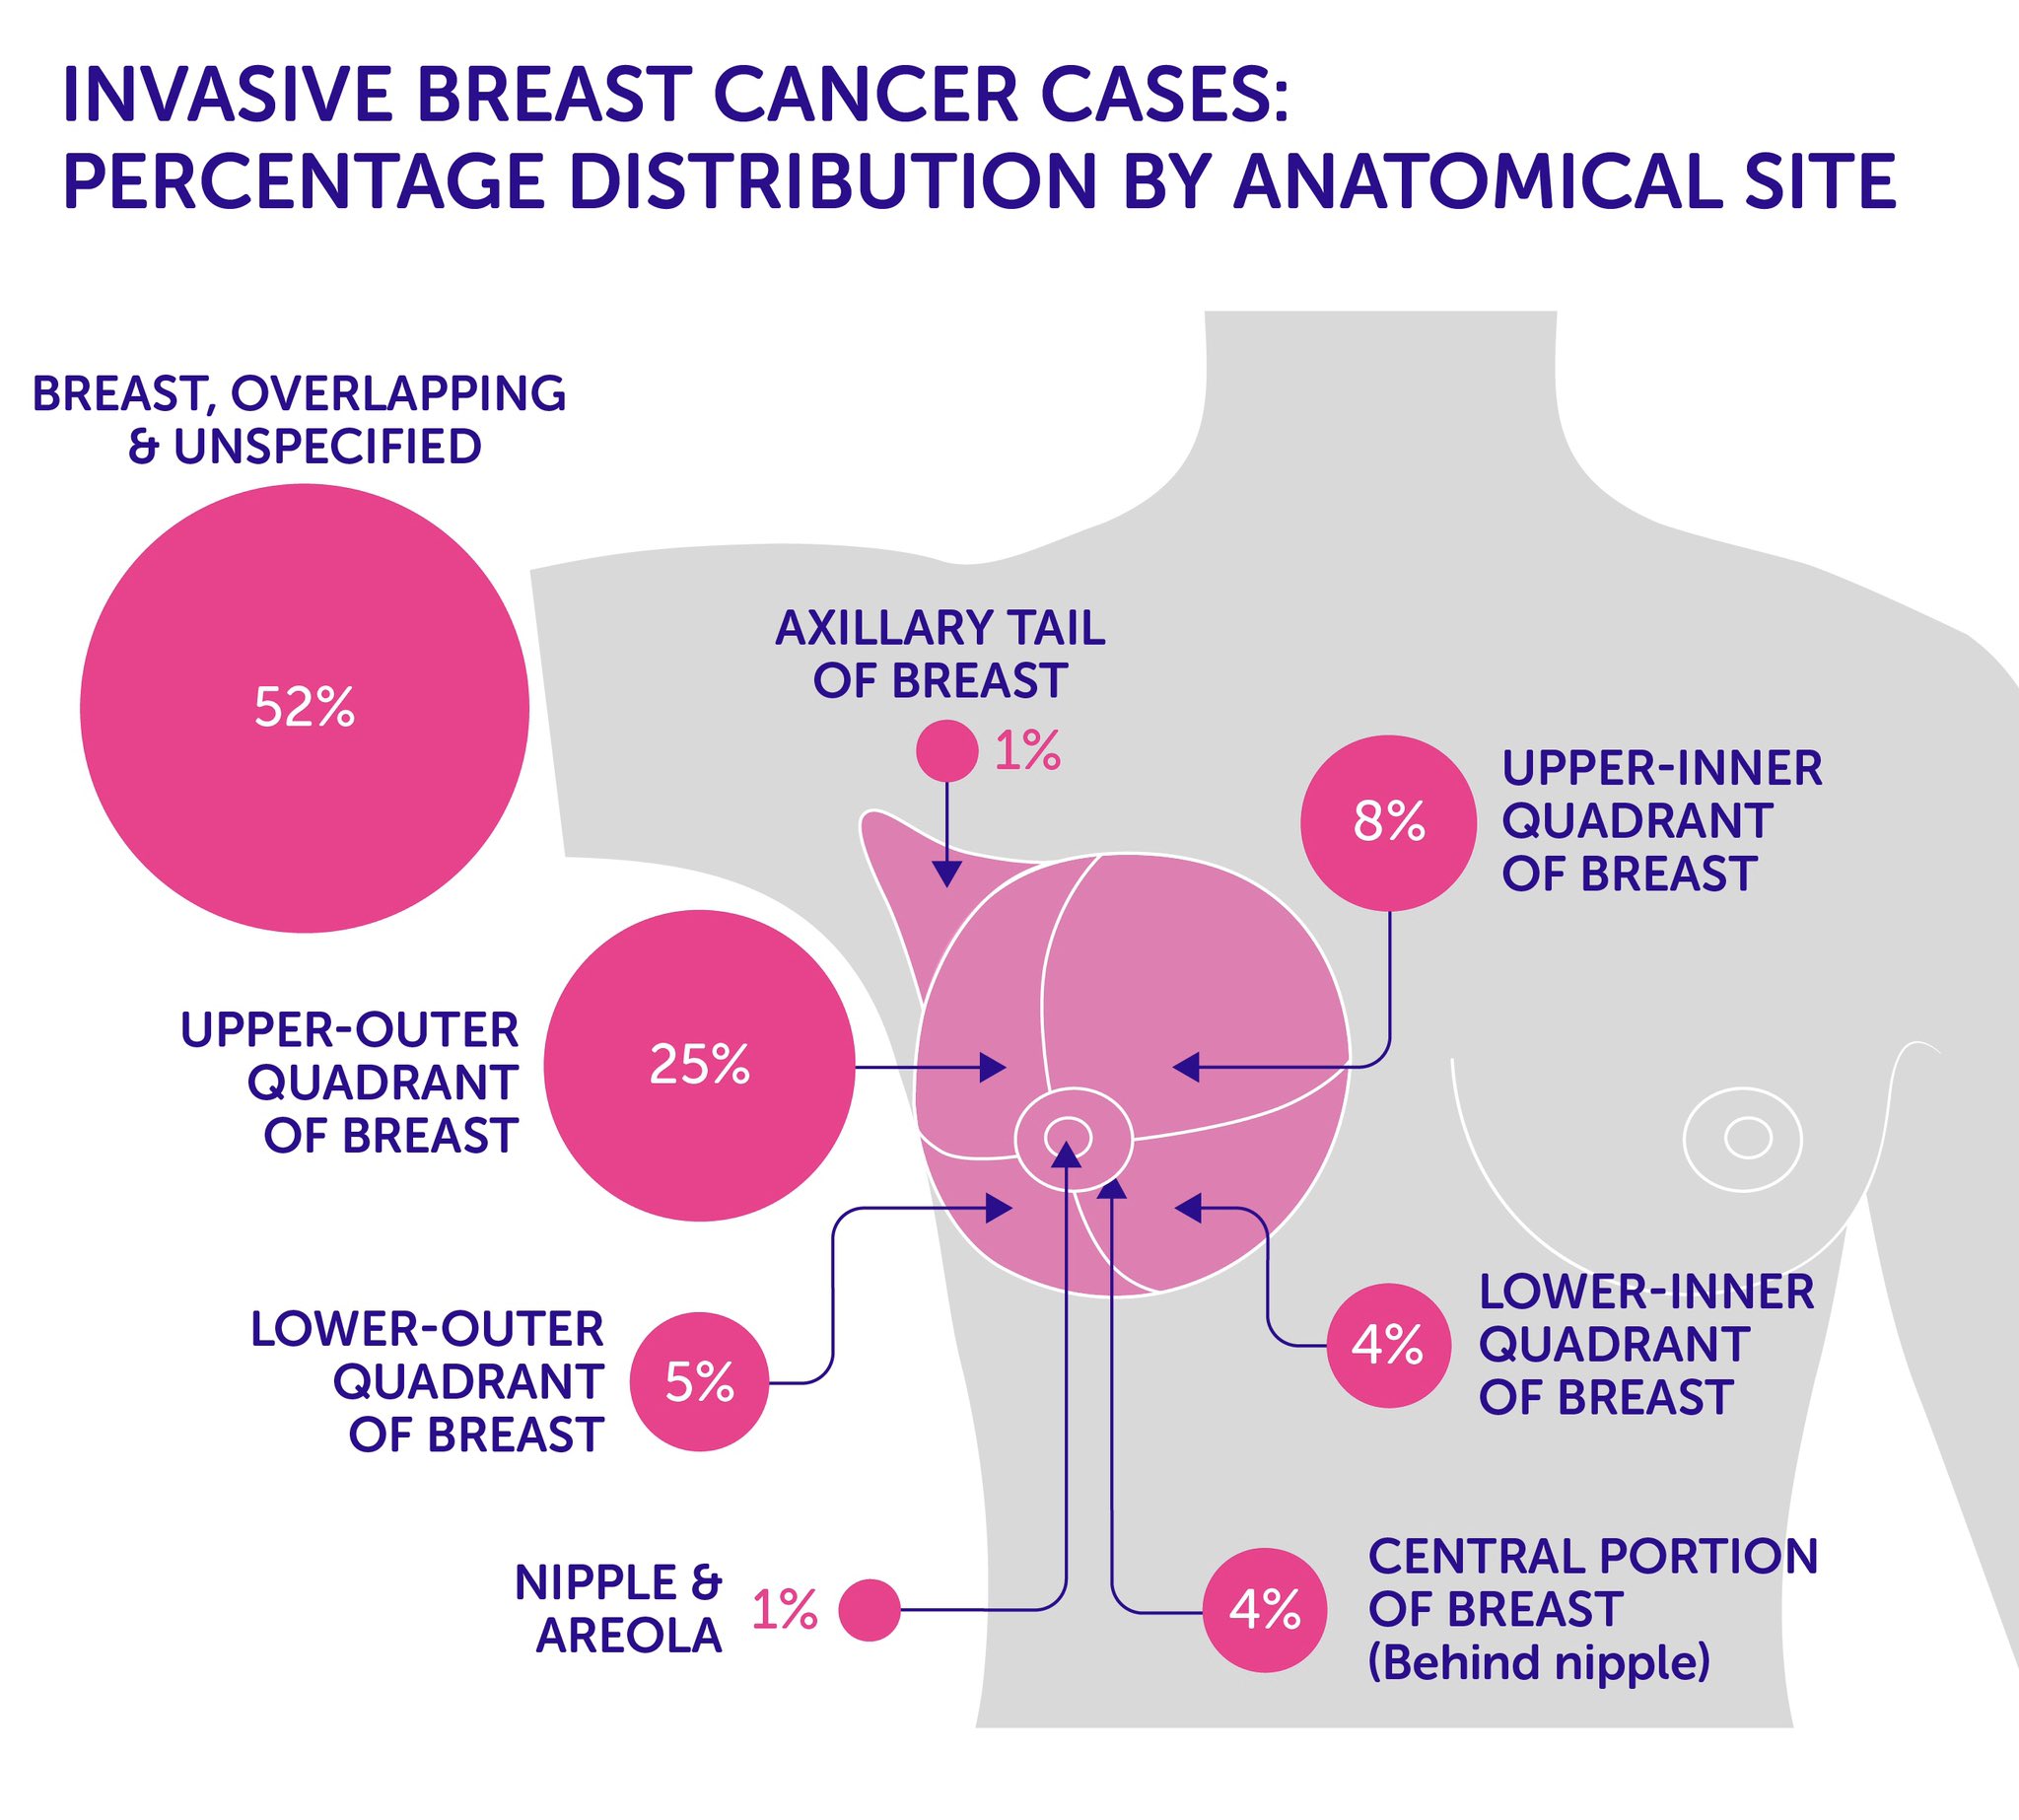 “Invasive #Breast #Cancer Cases: Percentage distribution by anatomical site...